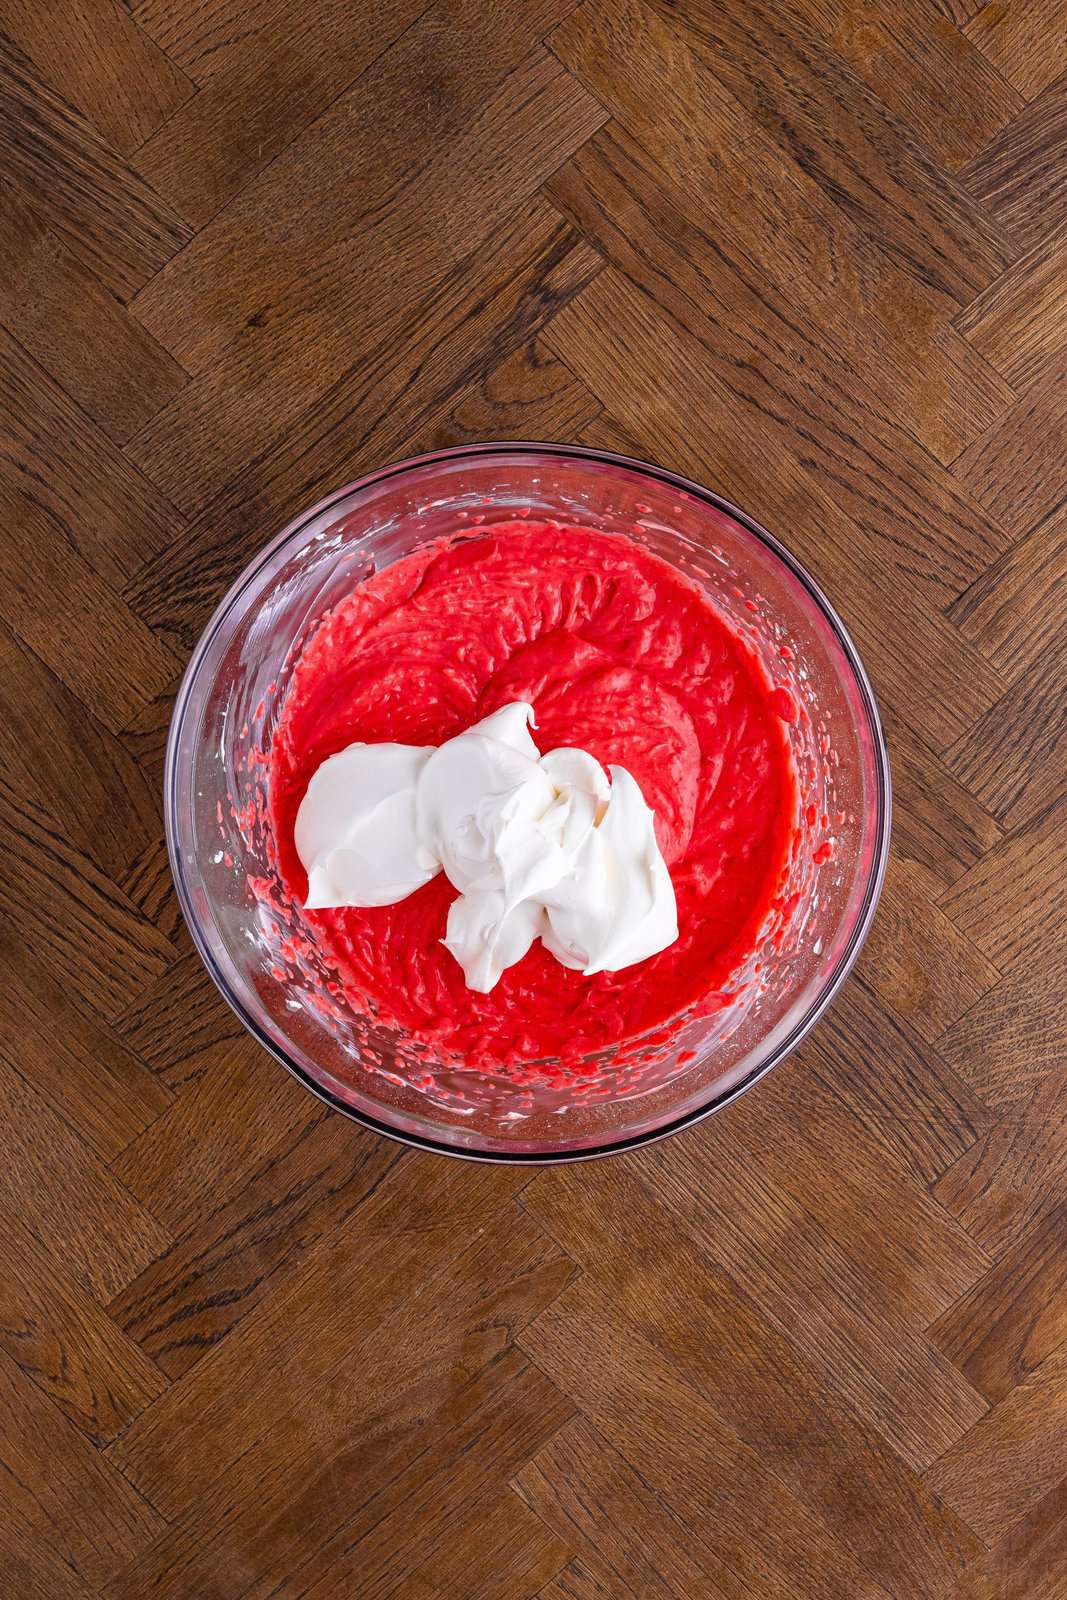 Strawberry filling, cream cheese, powdered sugar and Cool Whip all in a mixing bowl.